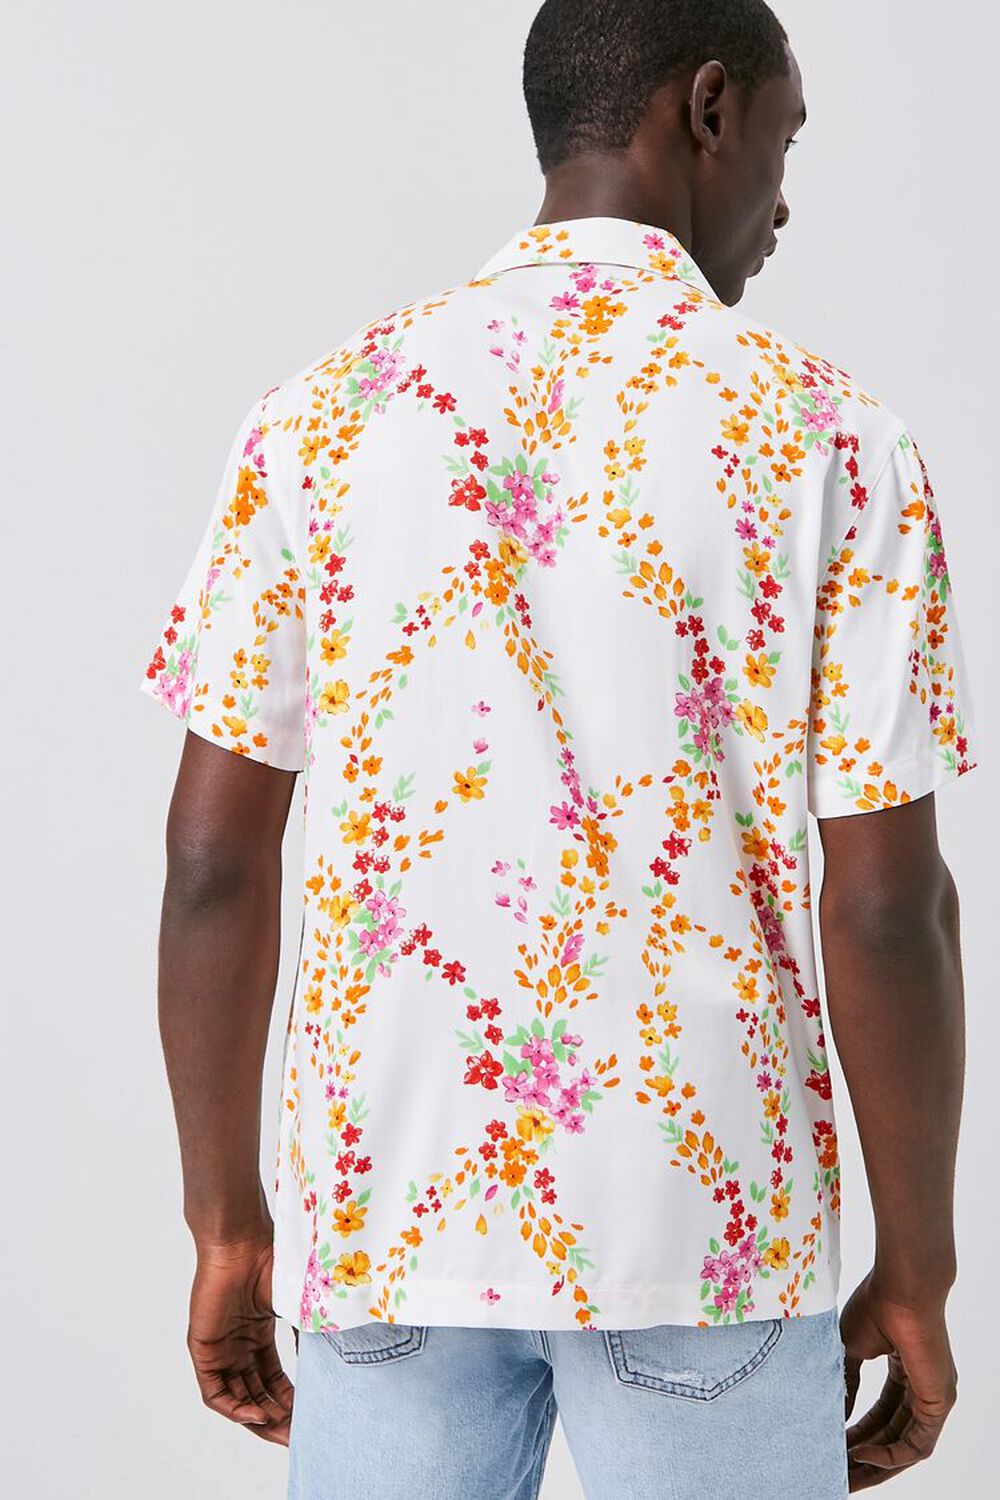 WHITE/MULTI Floral Print Fitted Shirt, image 3